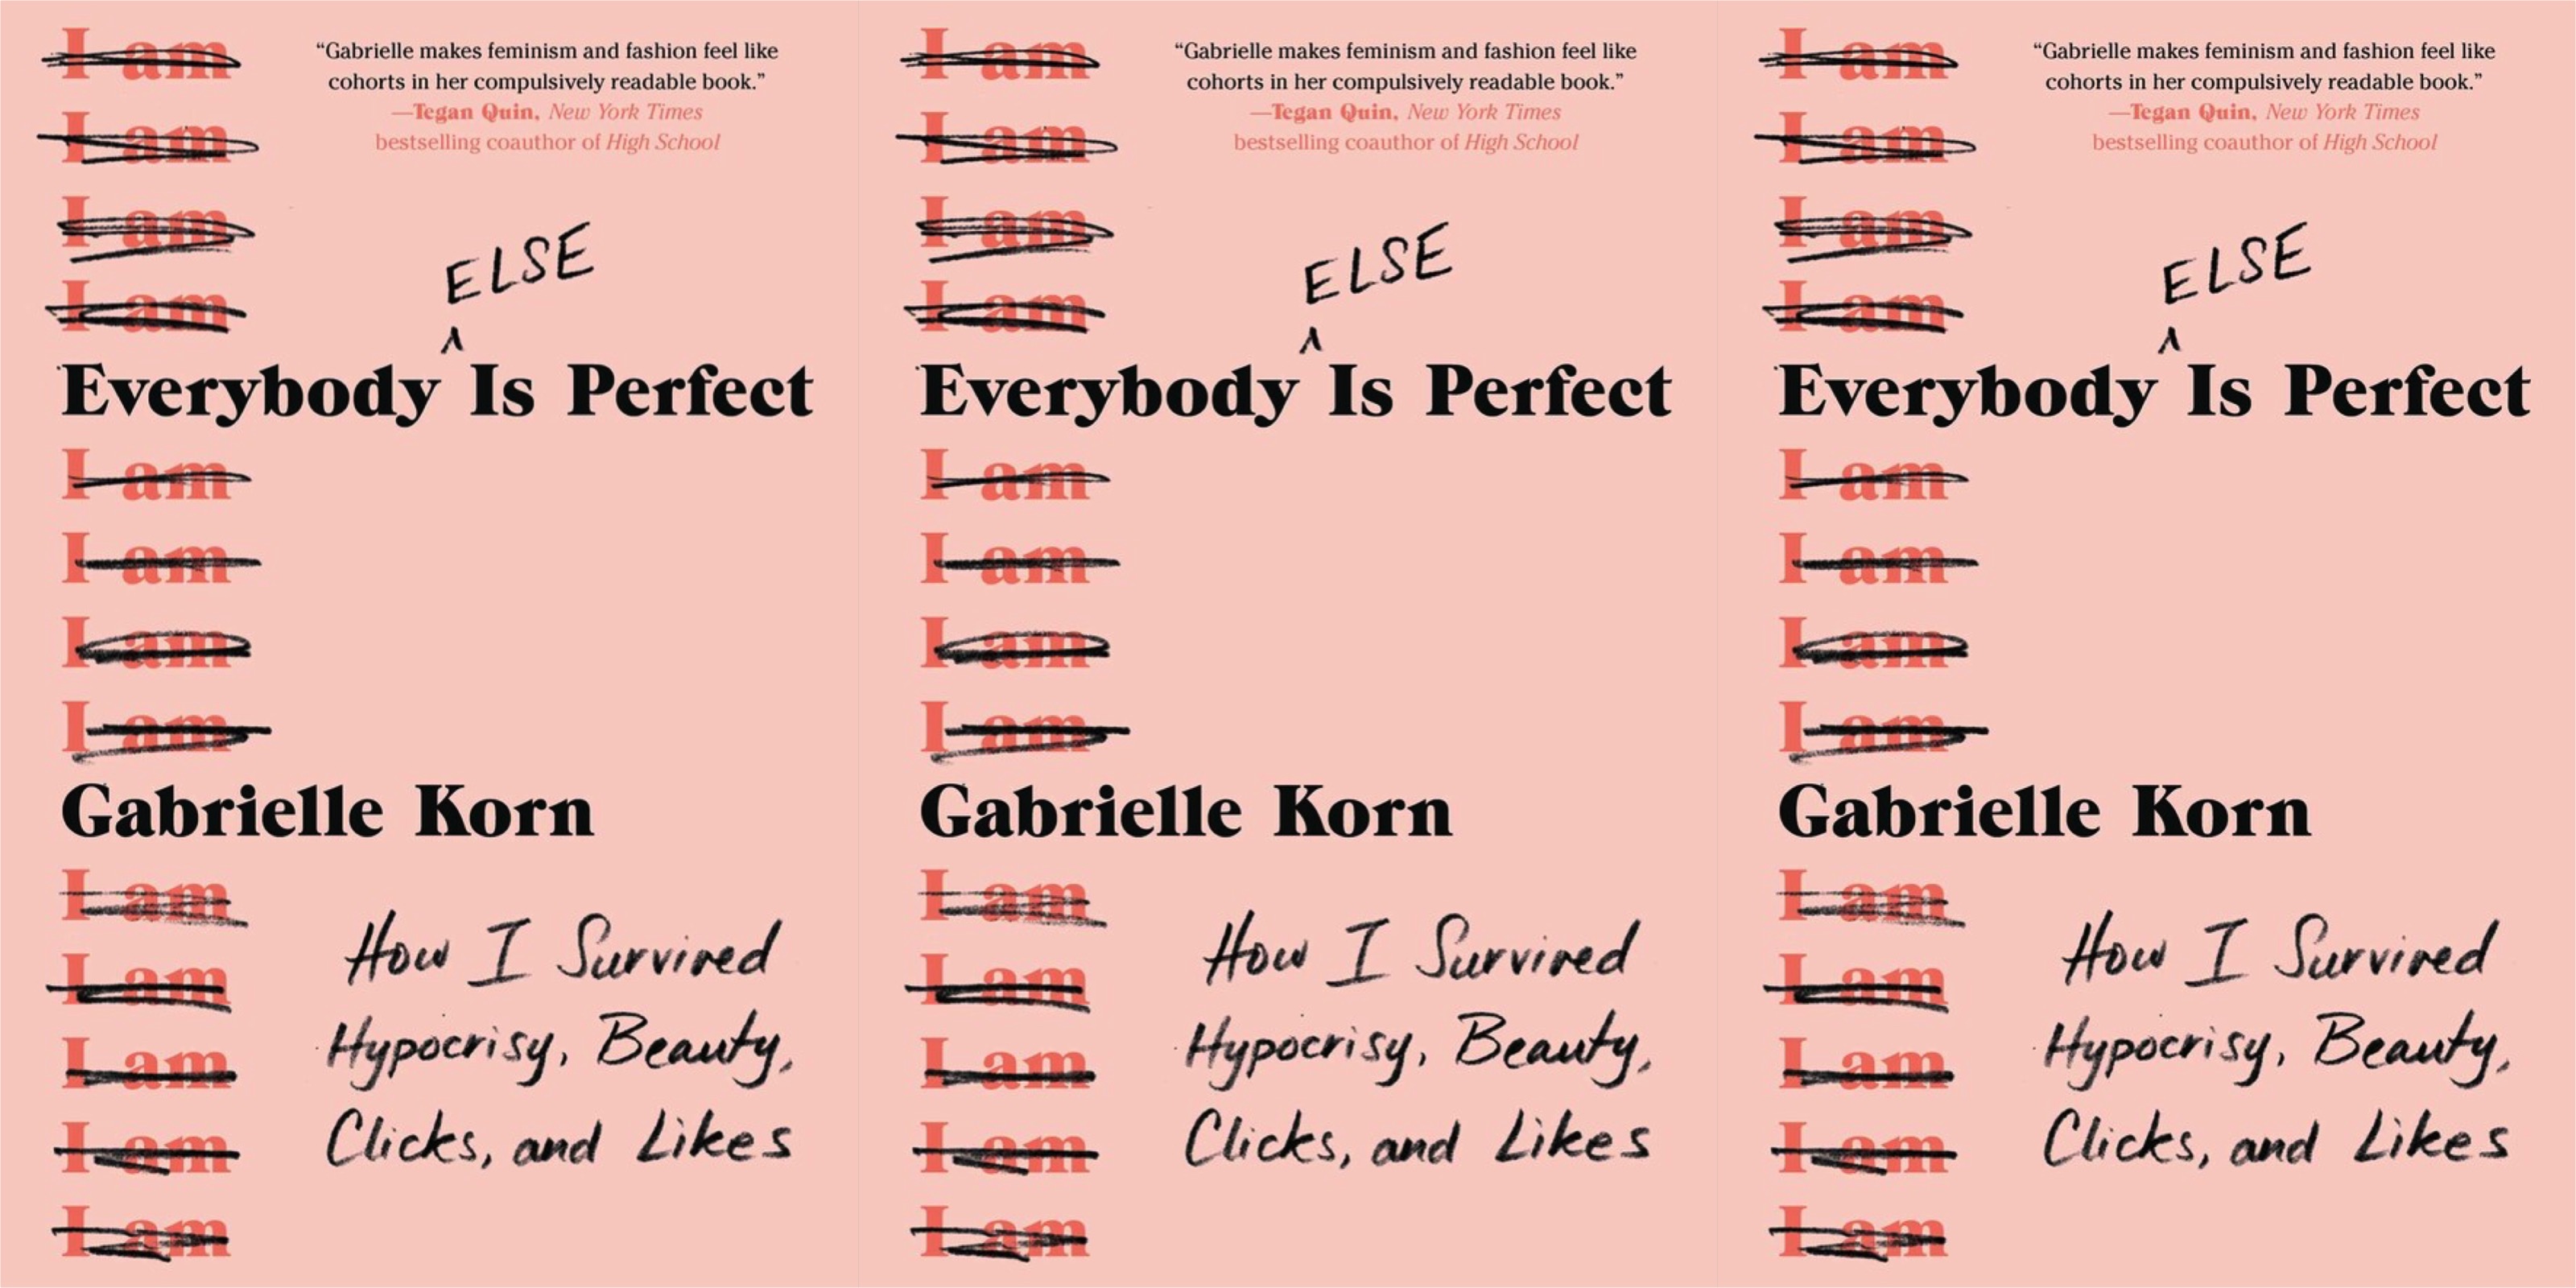 The cover of Everybody (Else) Is Perfect repeated three times